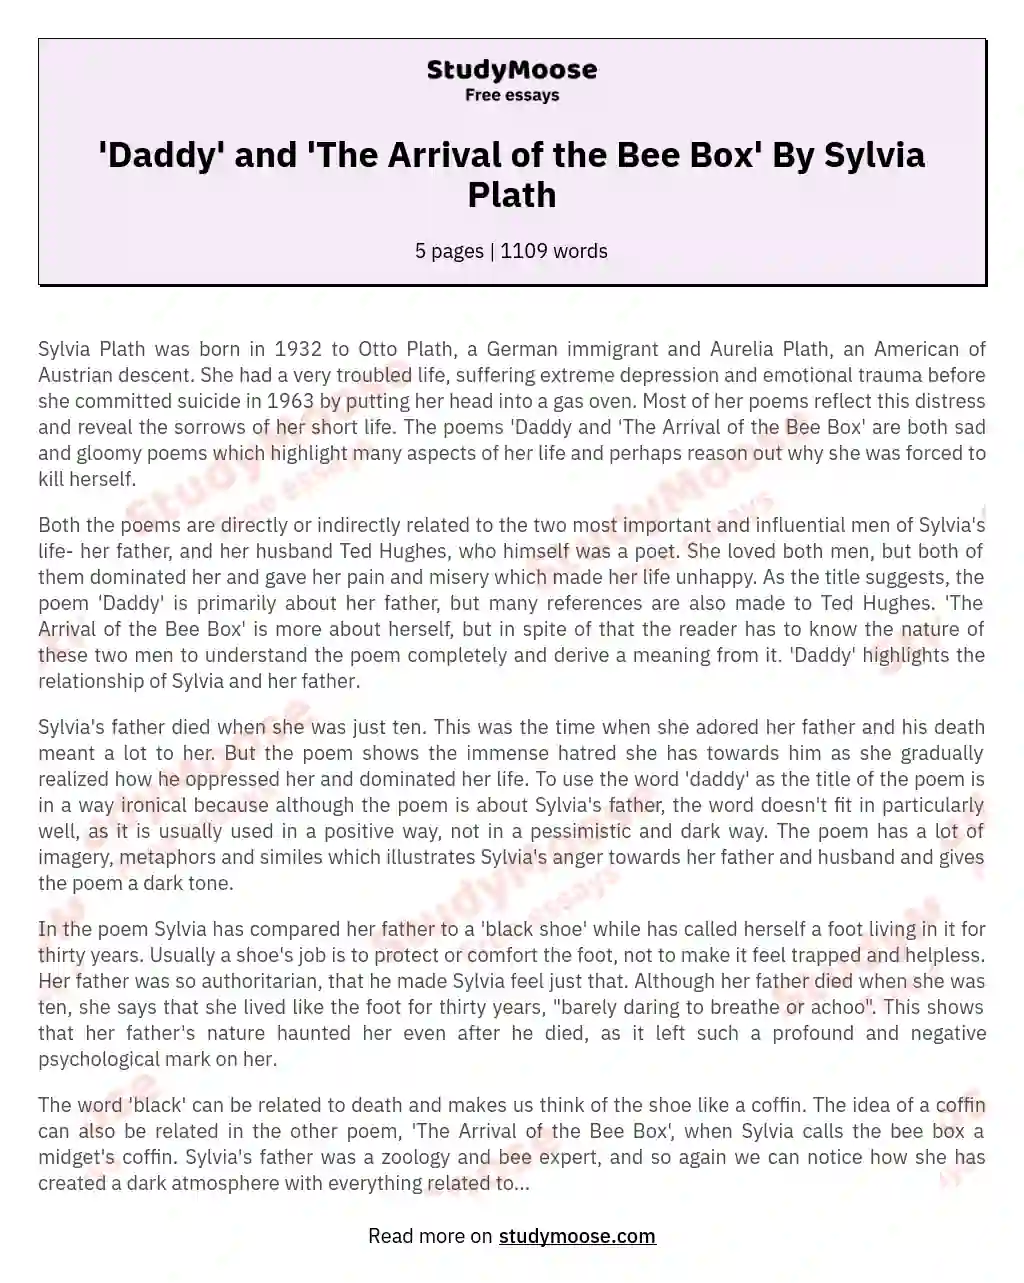 'Daddy' and 'The Arrival of the Bee Box' By Sylvia Plath essay